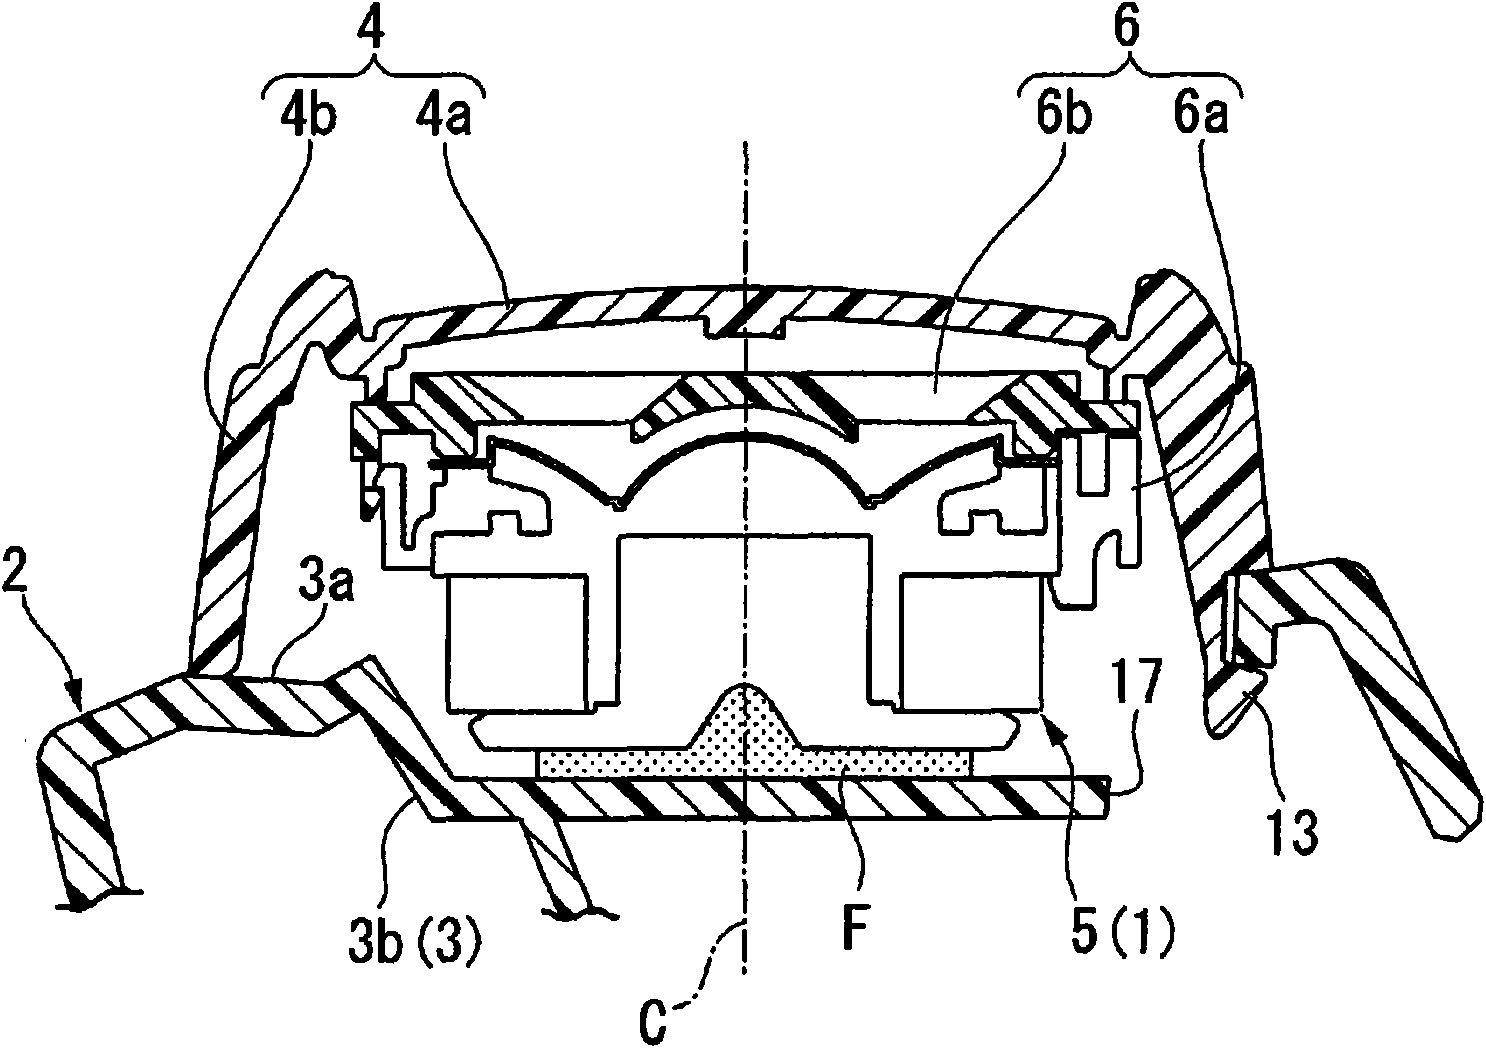 Loudspeaker mounting structure